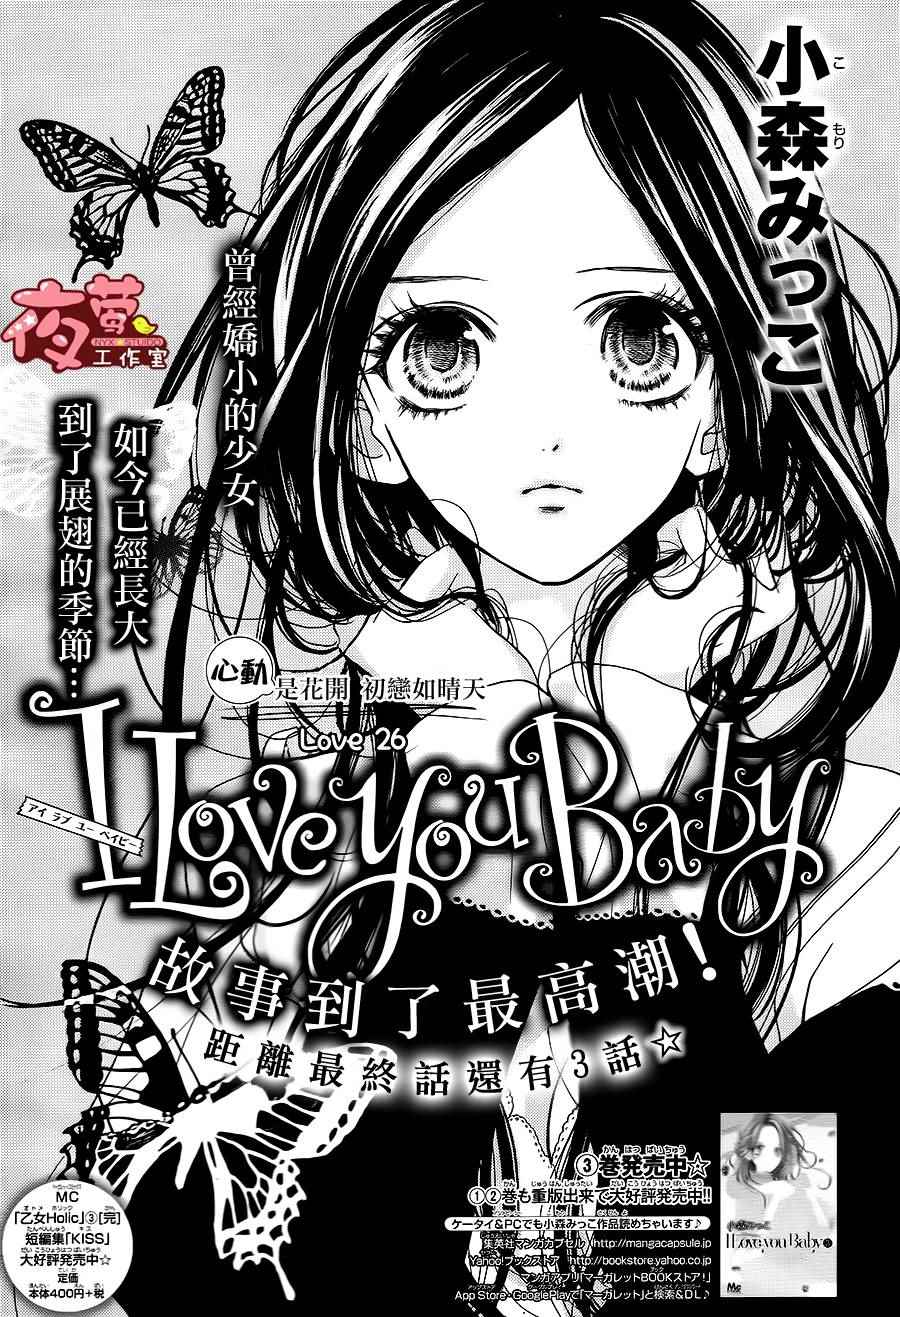 I love you baby - 第26话 - 1